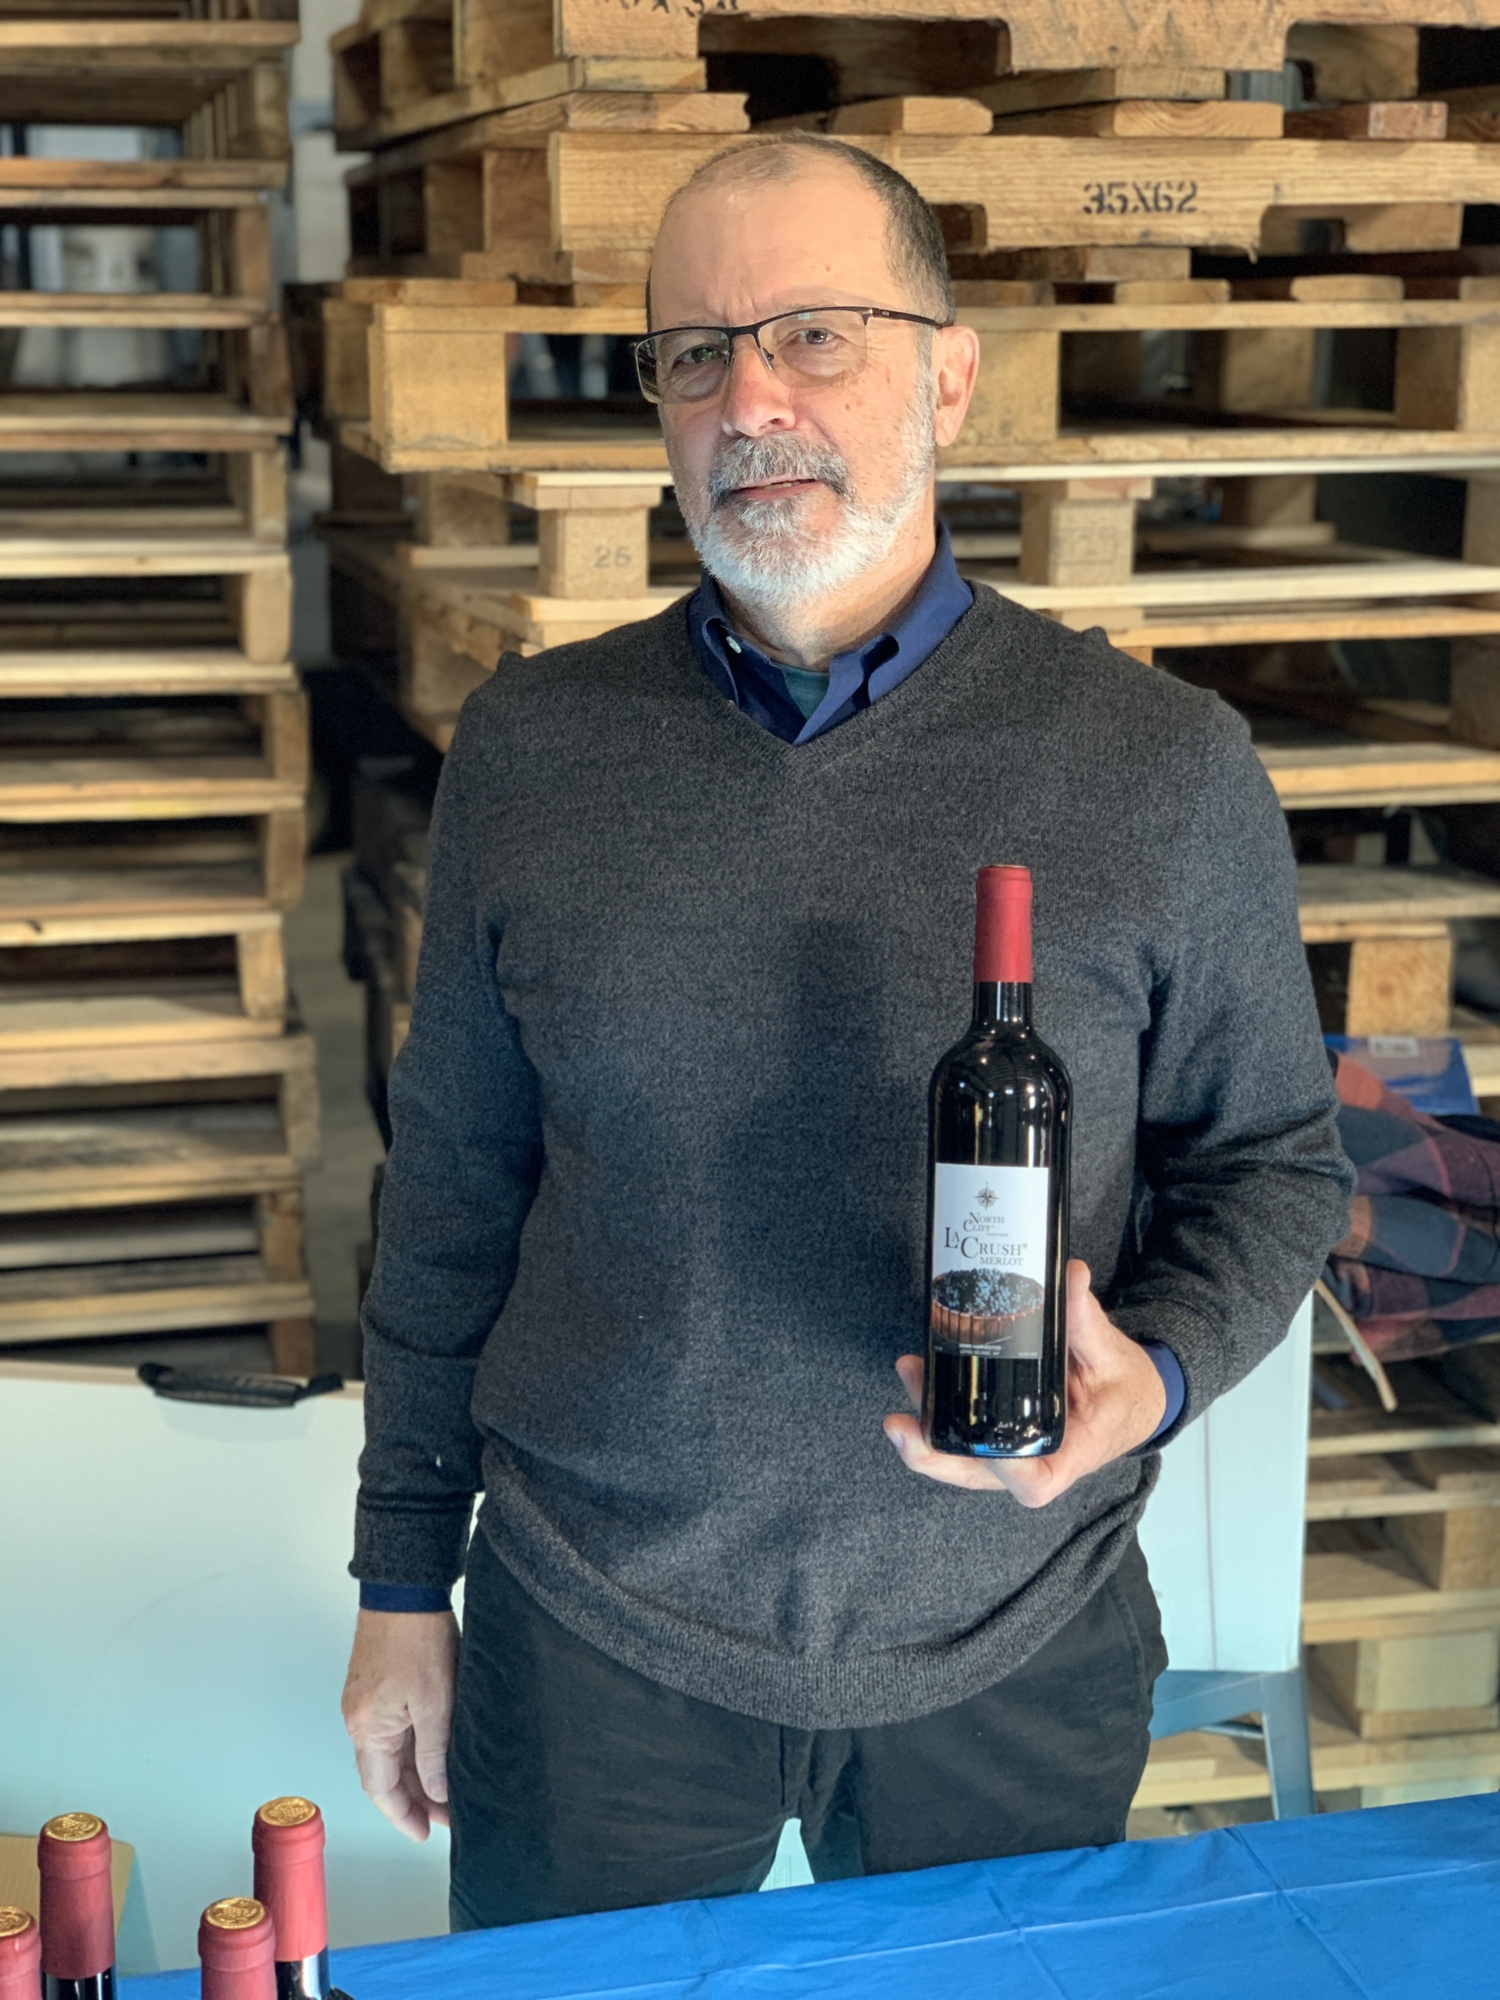 North Cliff Vineyards co-owner and winemaker Edmund Power with a bottle of his La Crush Merlot. S. DERMONT